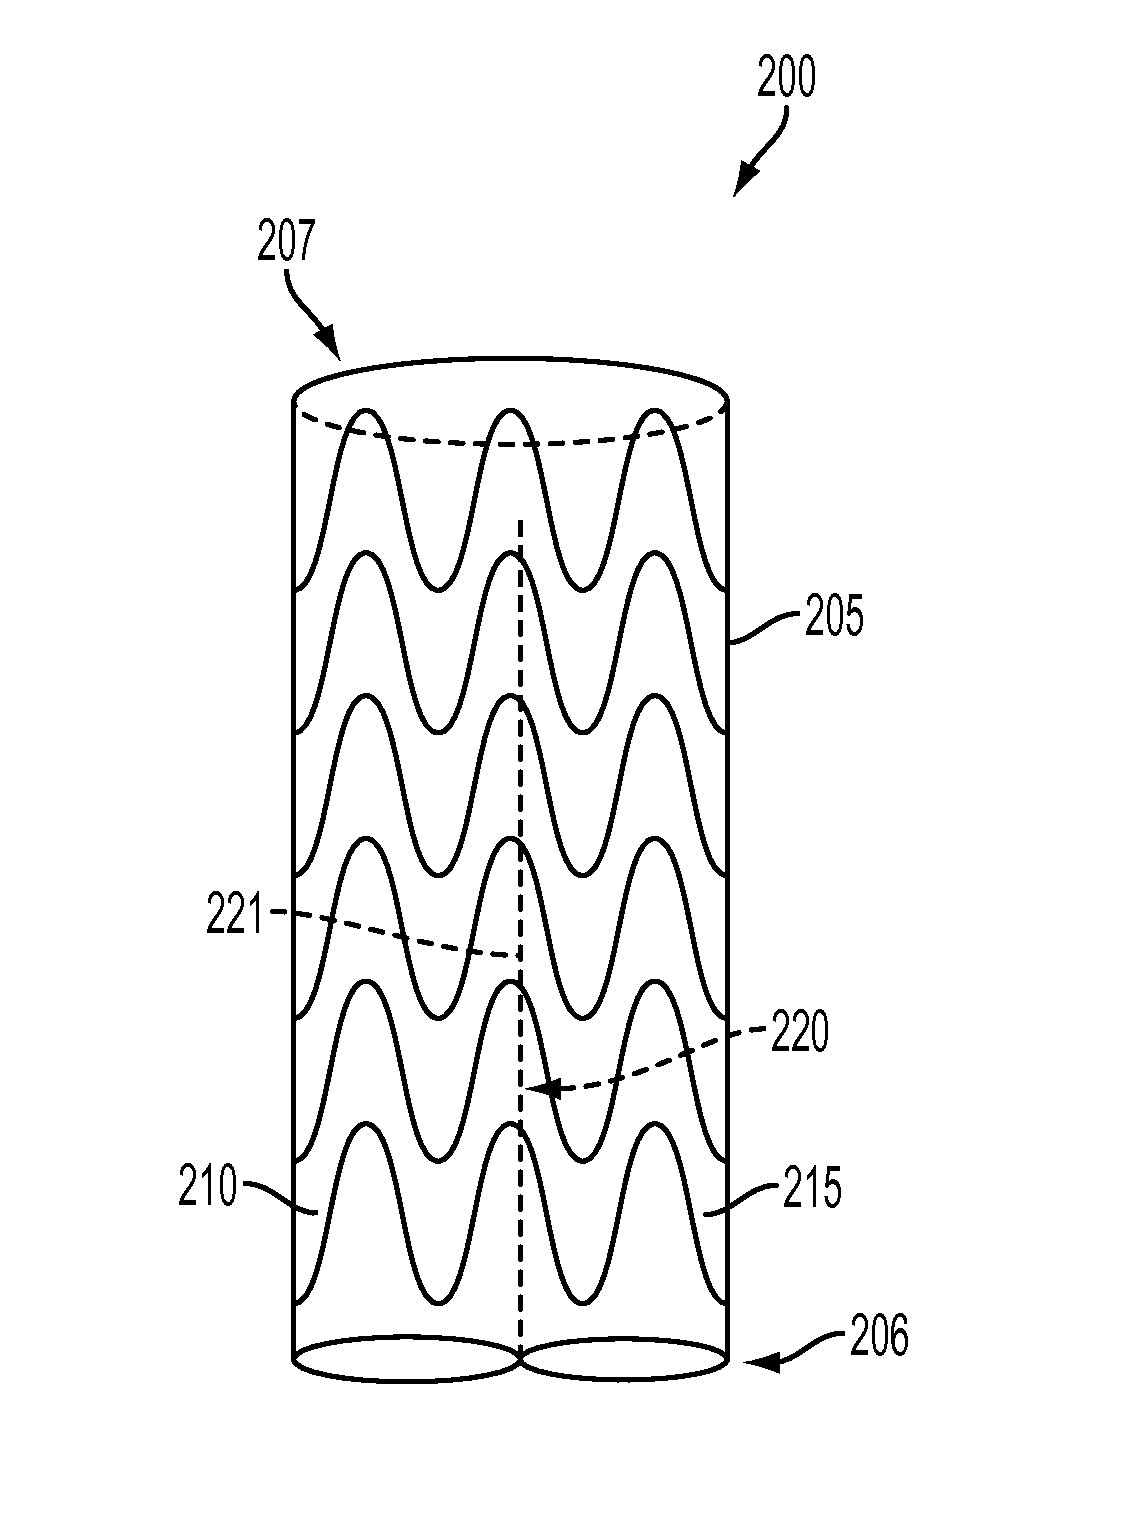 Combination Double-Barreled and Debranching Stent Grafts and Methods for Use